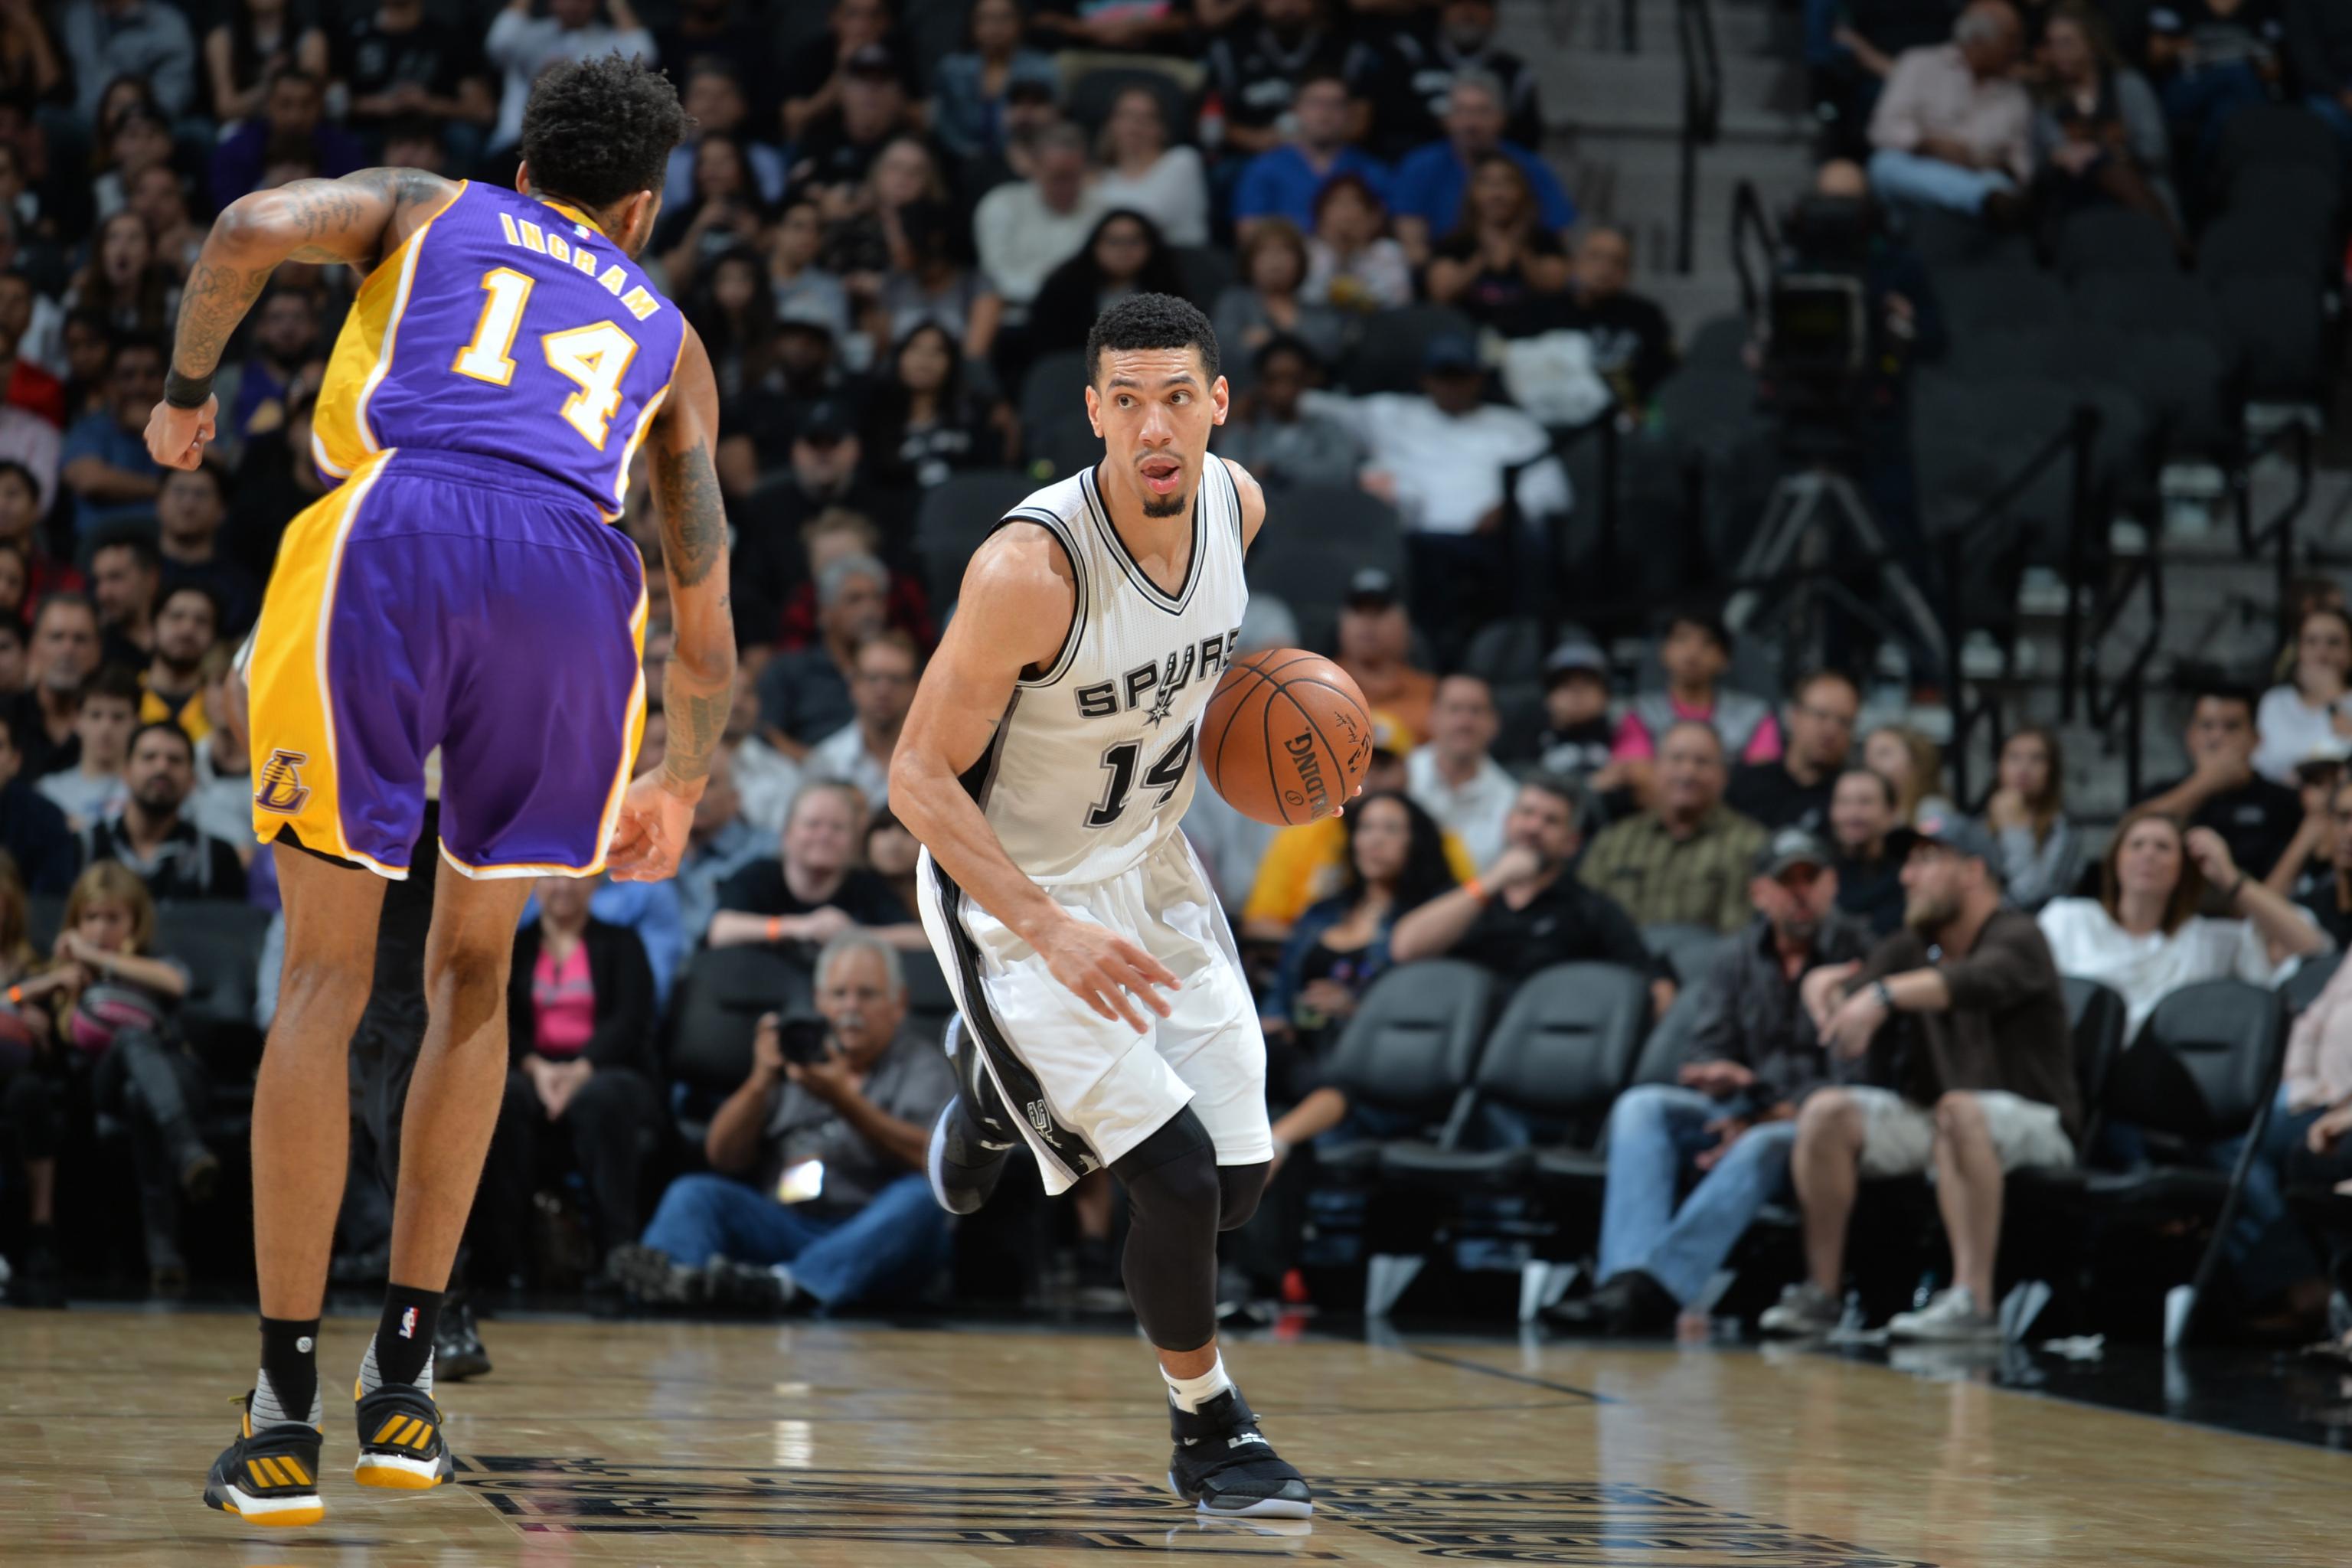 Spurs considering shutting down injured Danny Green